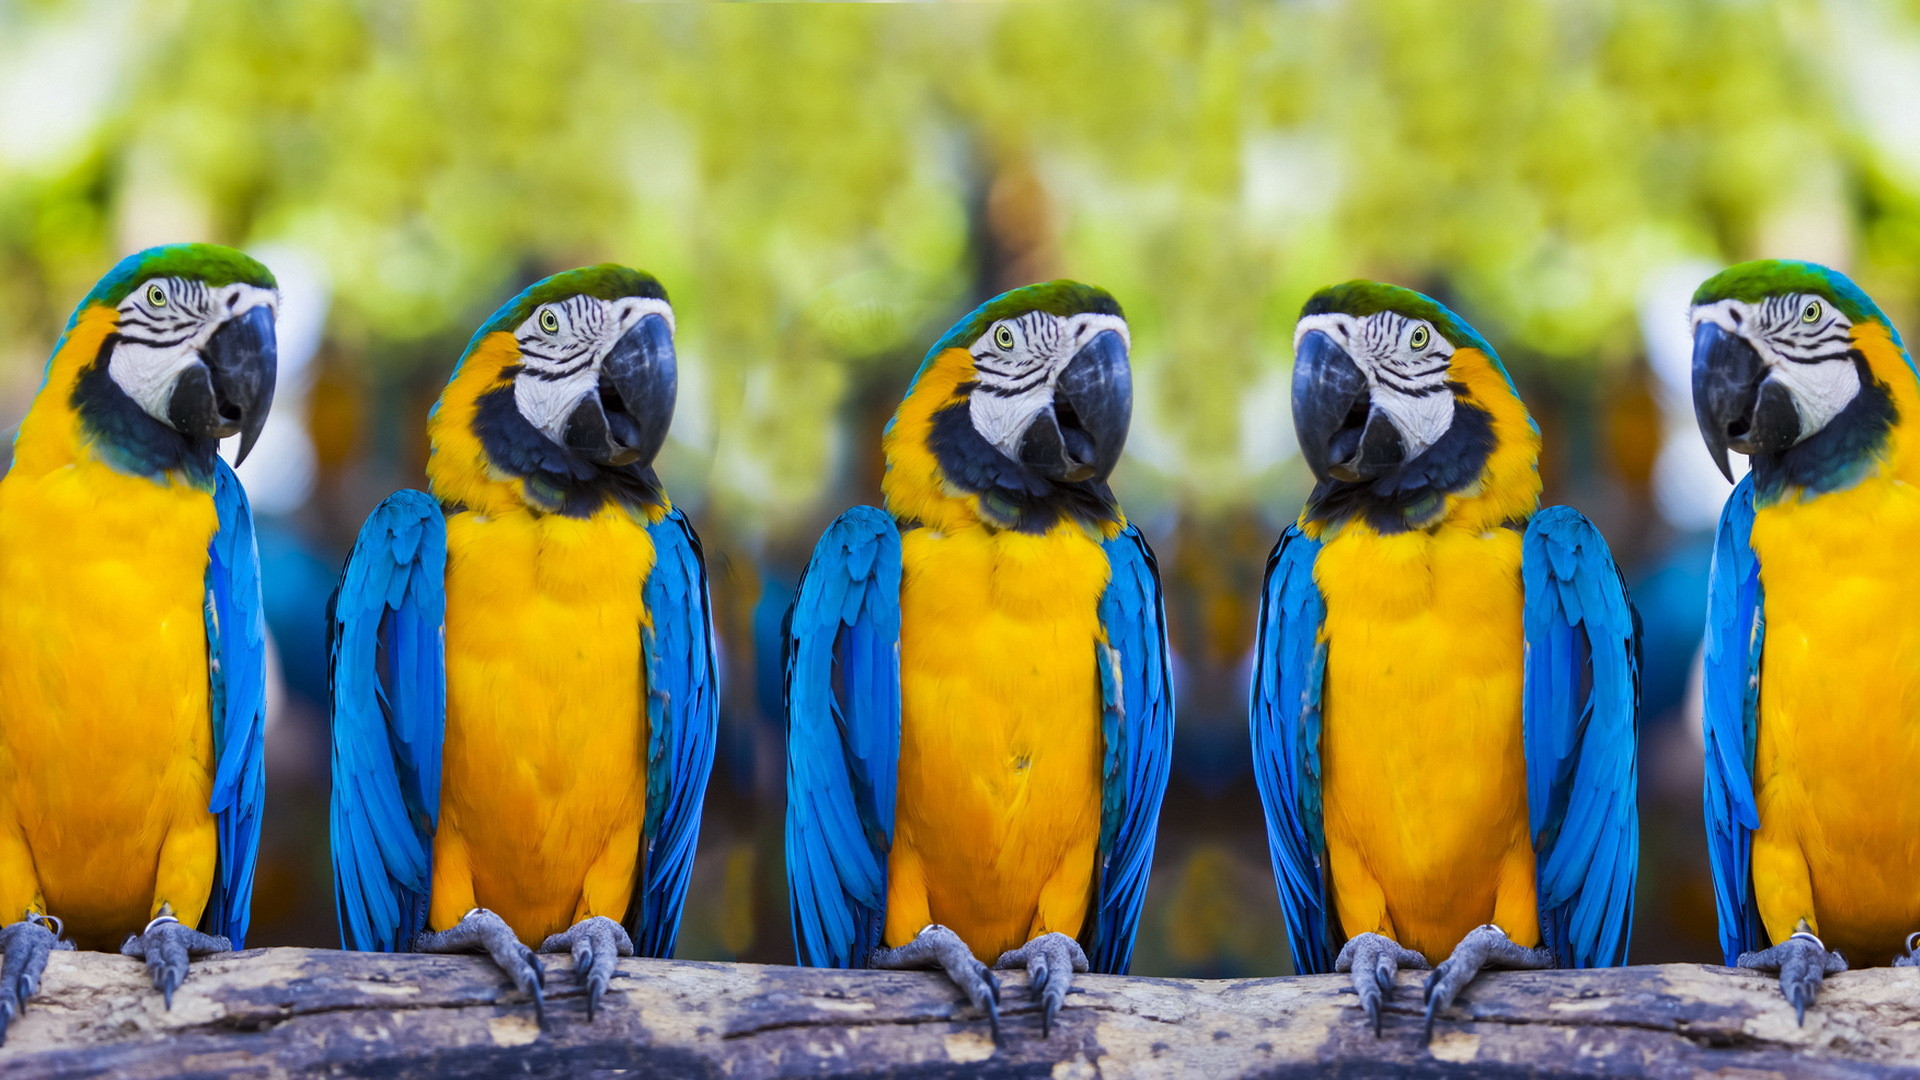 Wallpapers parrots blue yellow on the desktop